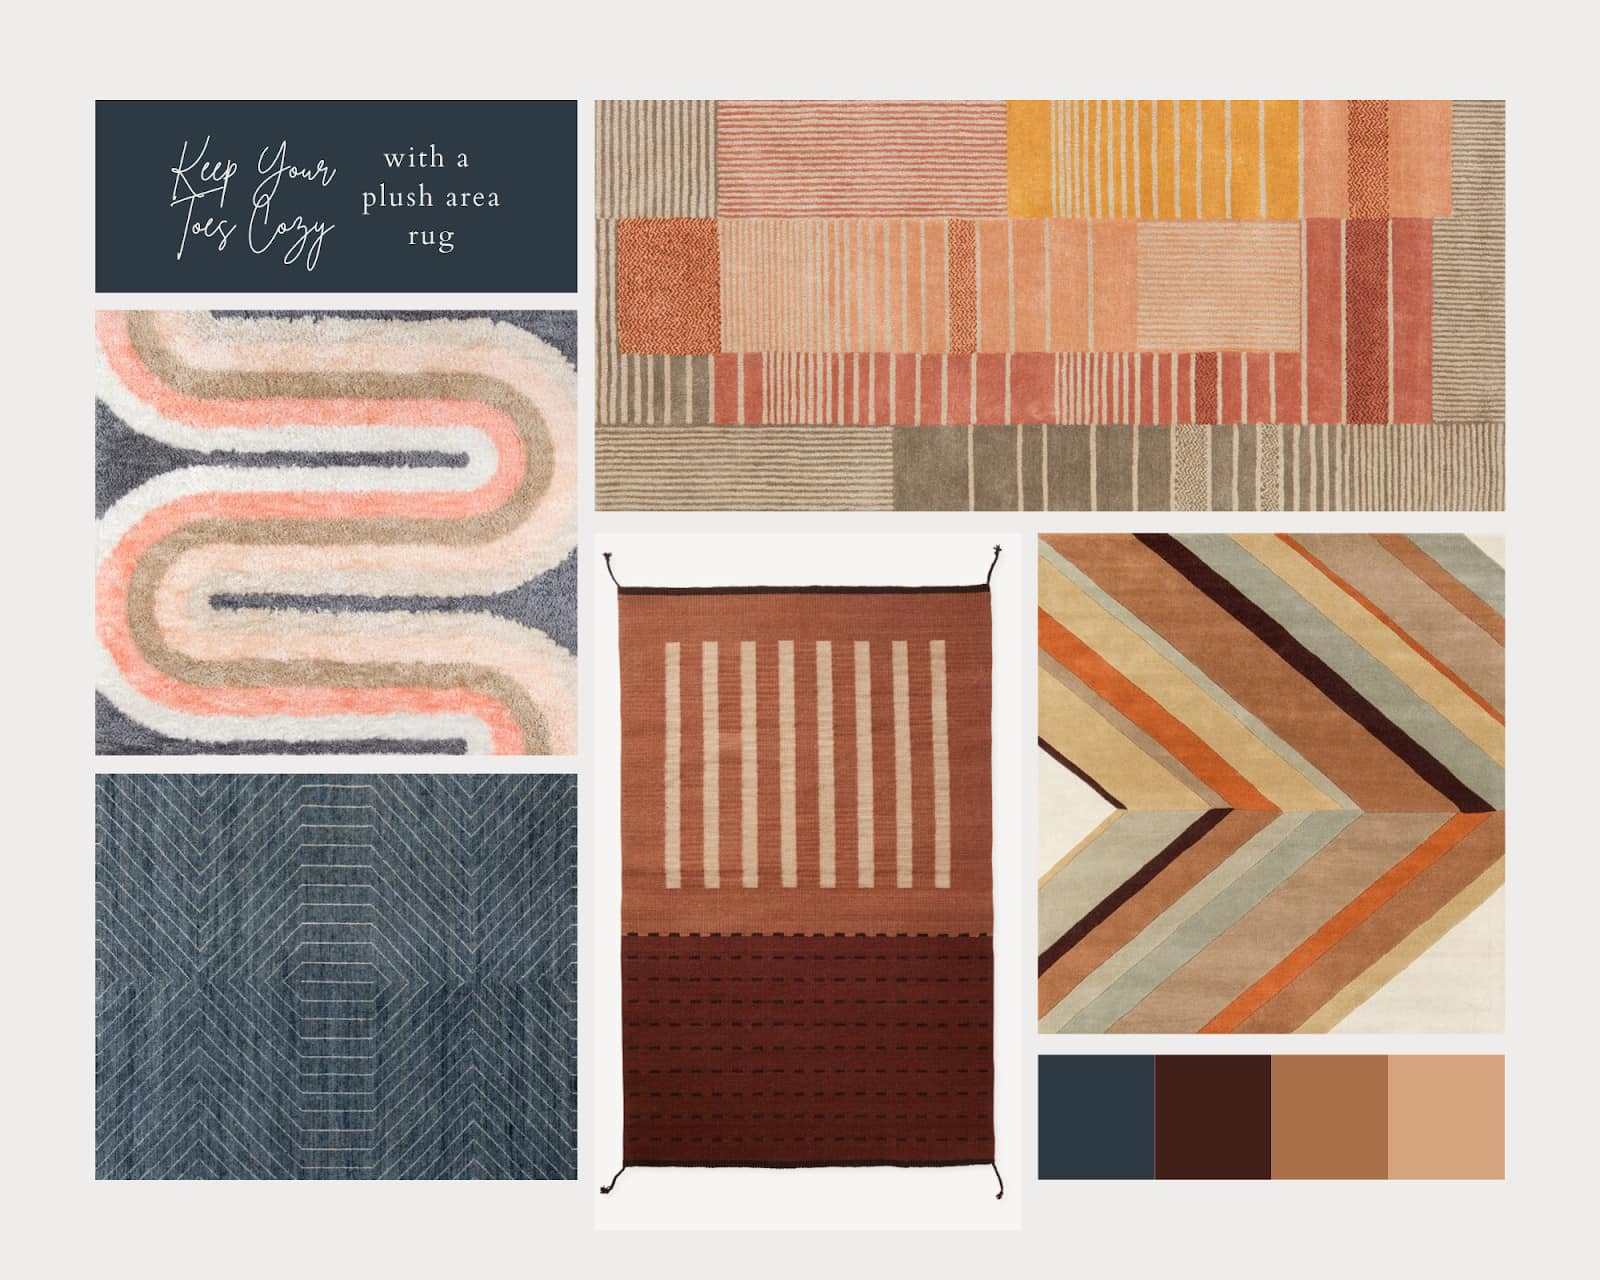 Danish and American Mid-Century Modern- inspired rugs for laundry rooms